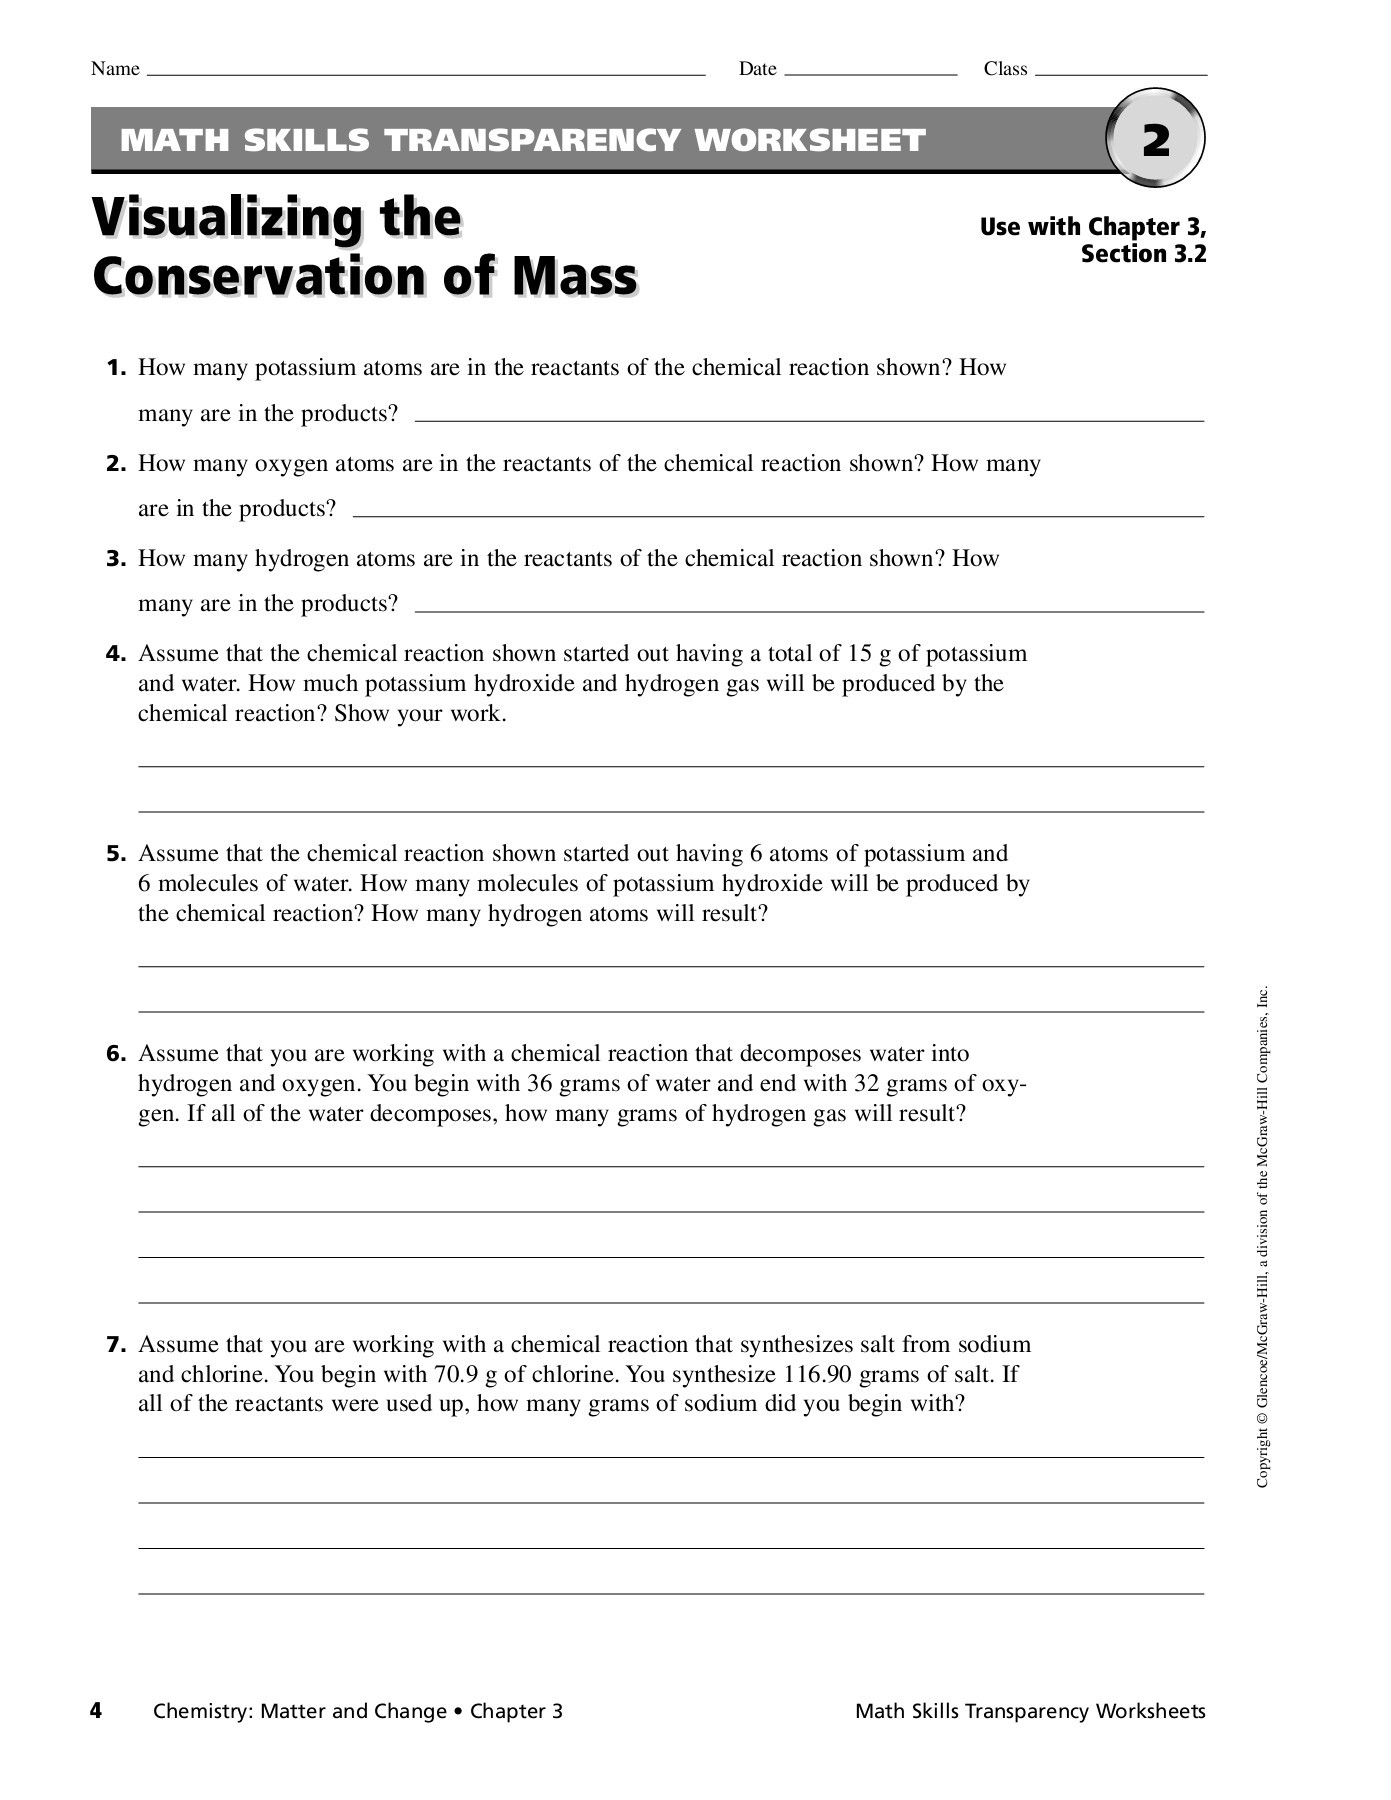 Math Skills Transparency Worksheet Visualizing The Conservation Of Mass Answers